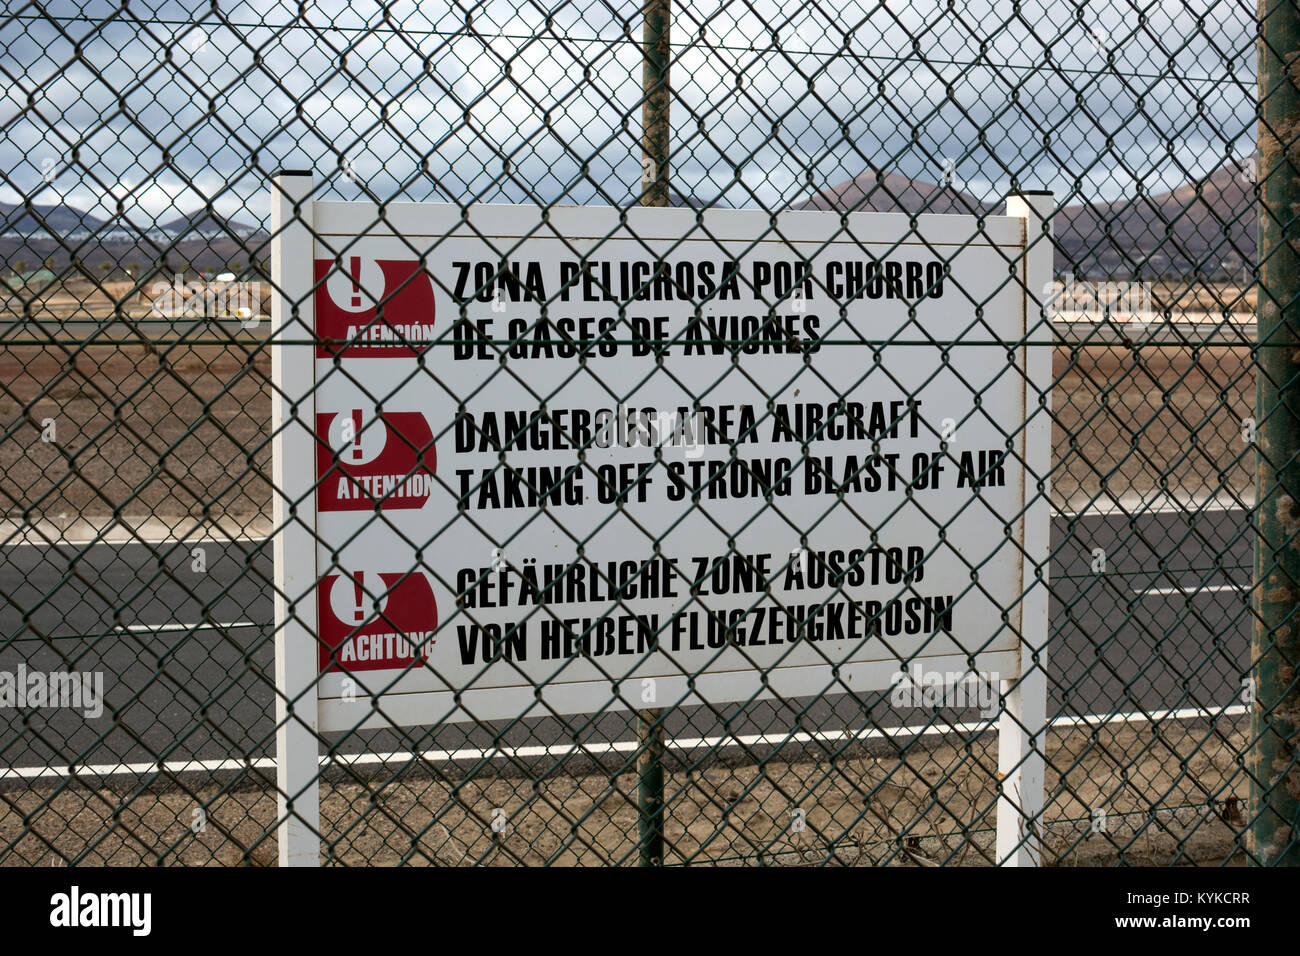 Warning sign at Arrecife Airport, Lanzarote, Canary Islands, Spain. Stock Photo